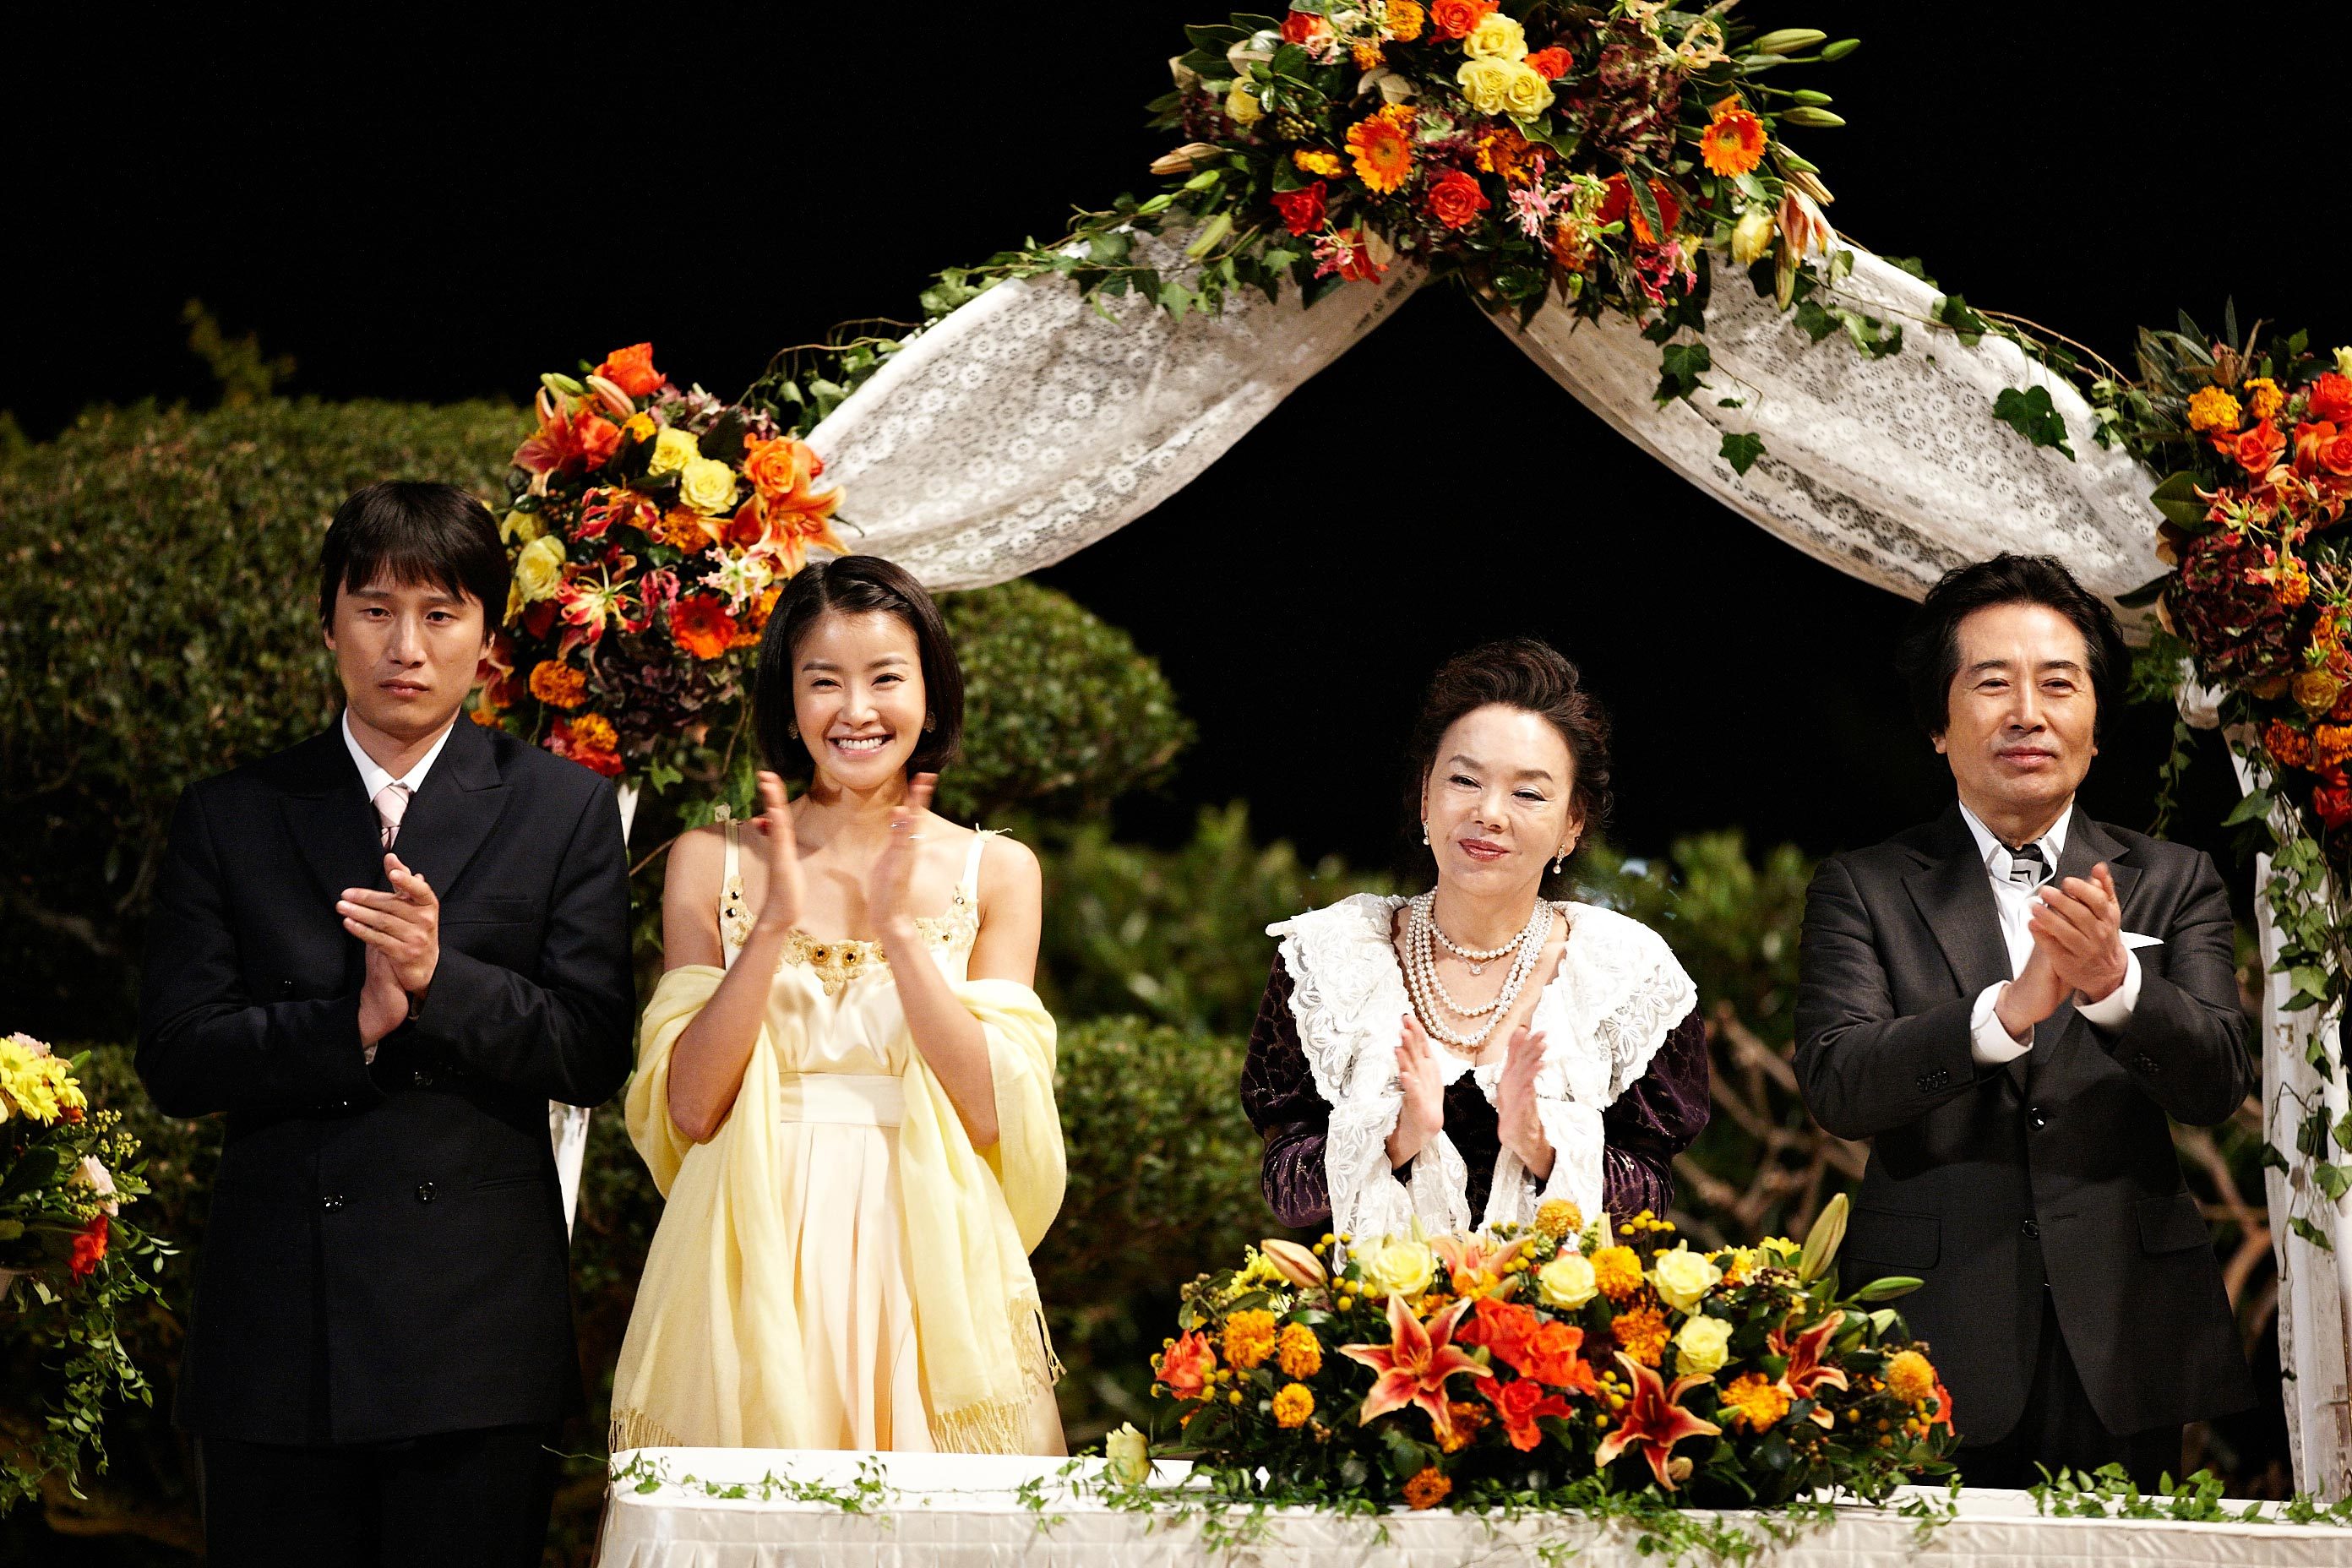 [2011] Meet The-In-Laws/ 위험한 상견례 - Song Sae Byuk, Lee Si Young (Vietsub Completed) 1232B4394D7E7C8F2466D3